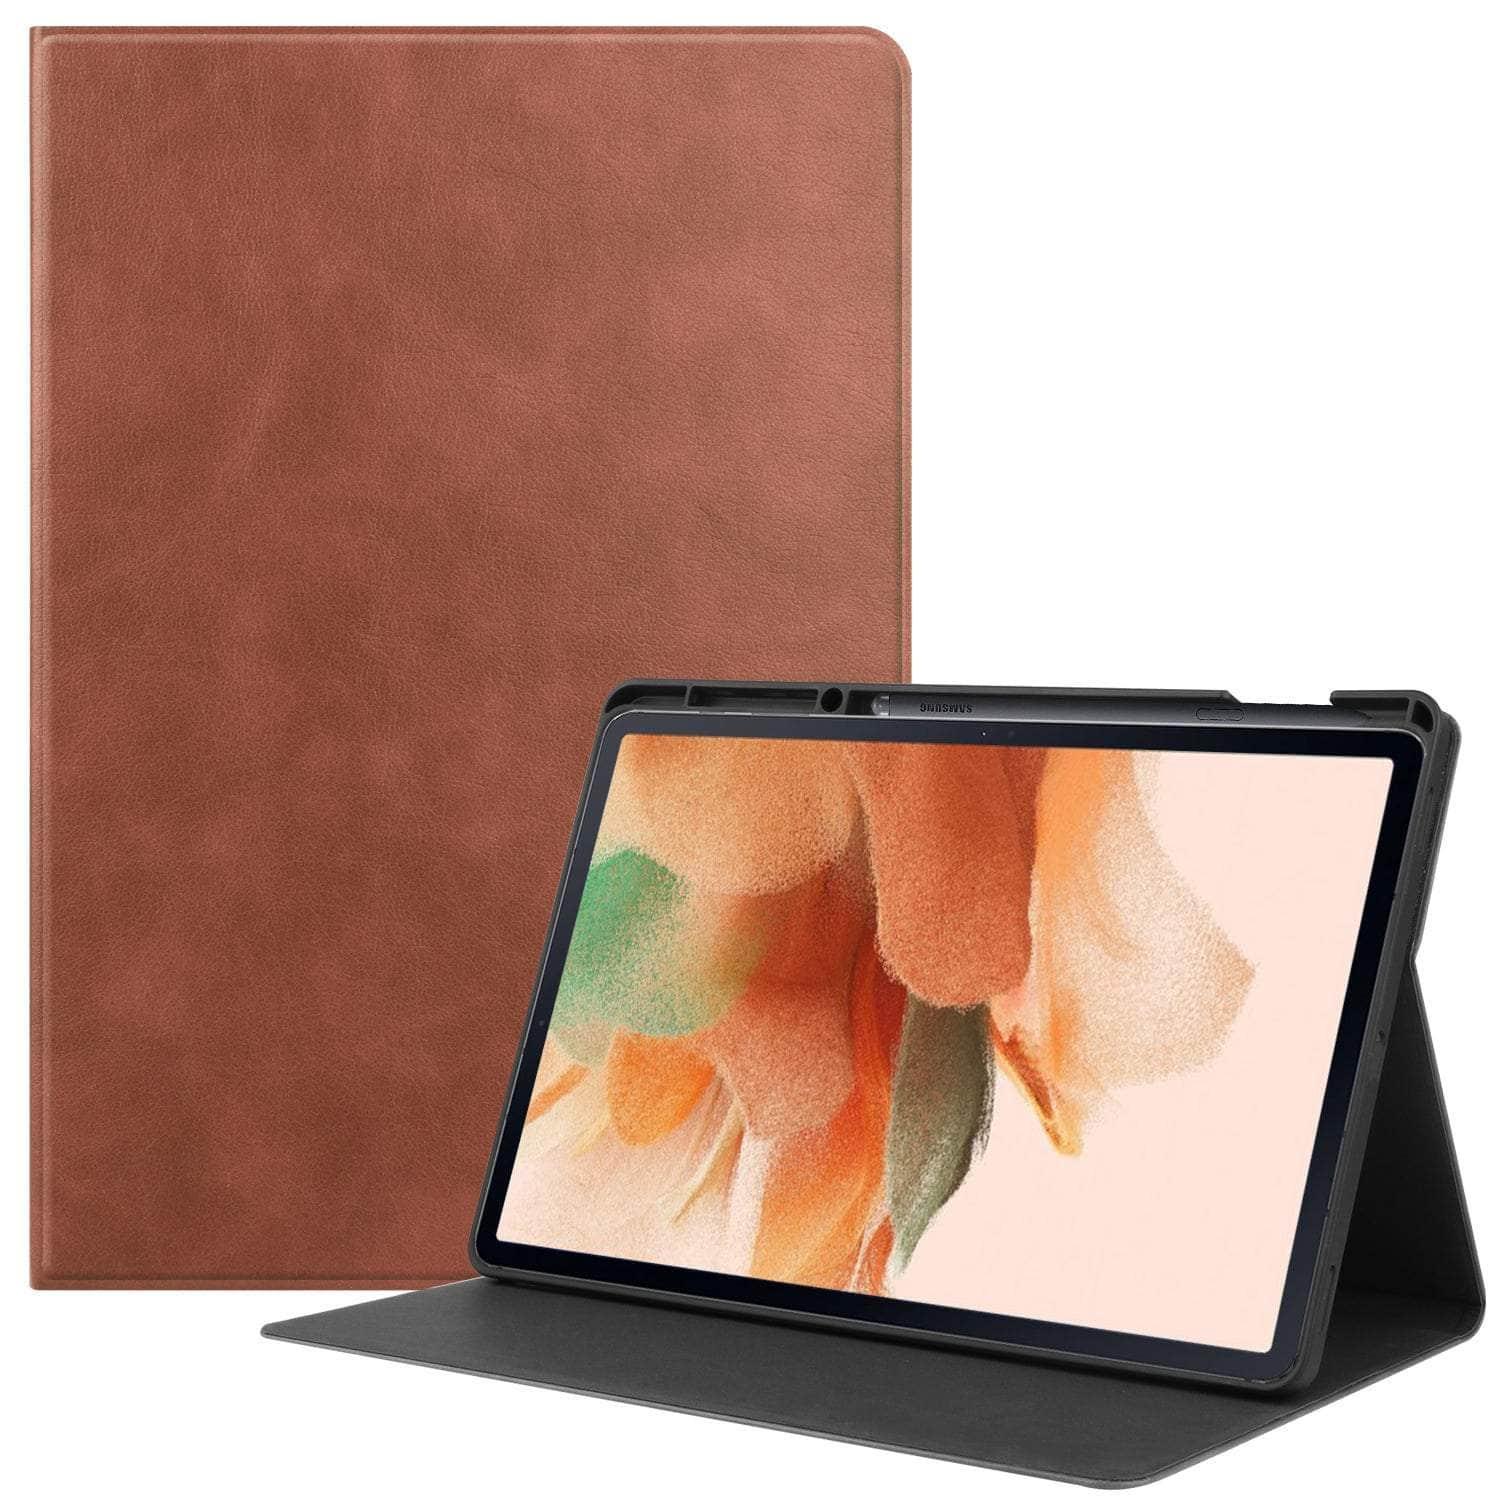 CaseBuddy Australia Casebuddy Smart Tab S8 X700 Protective Magnetic Adsorption Cowhide Leather Case